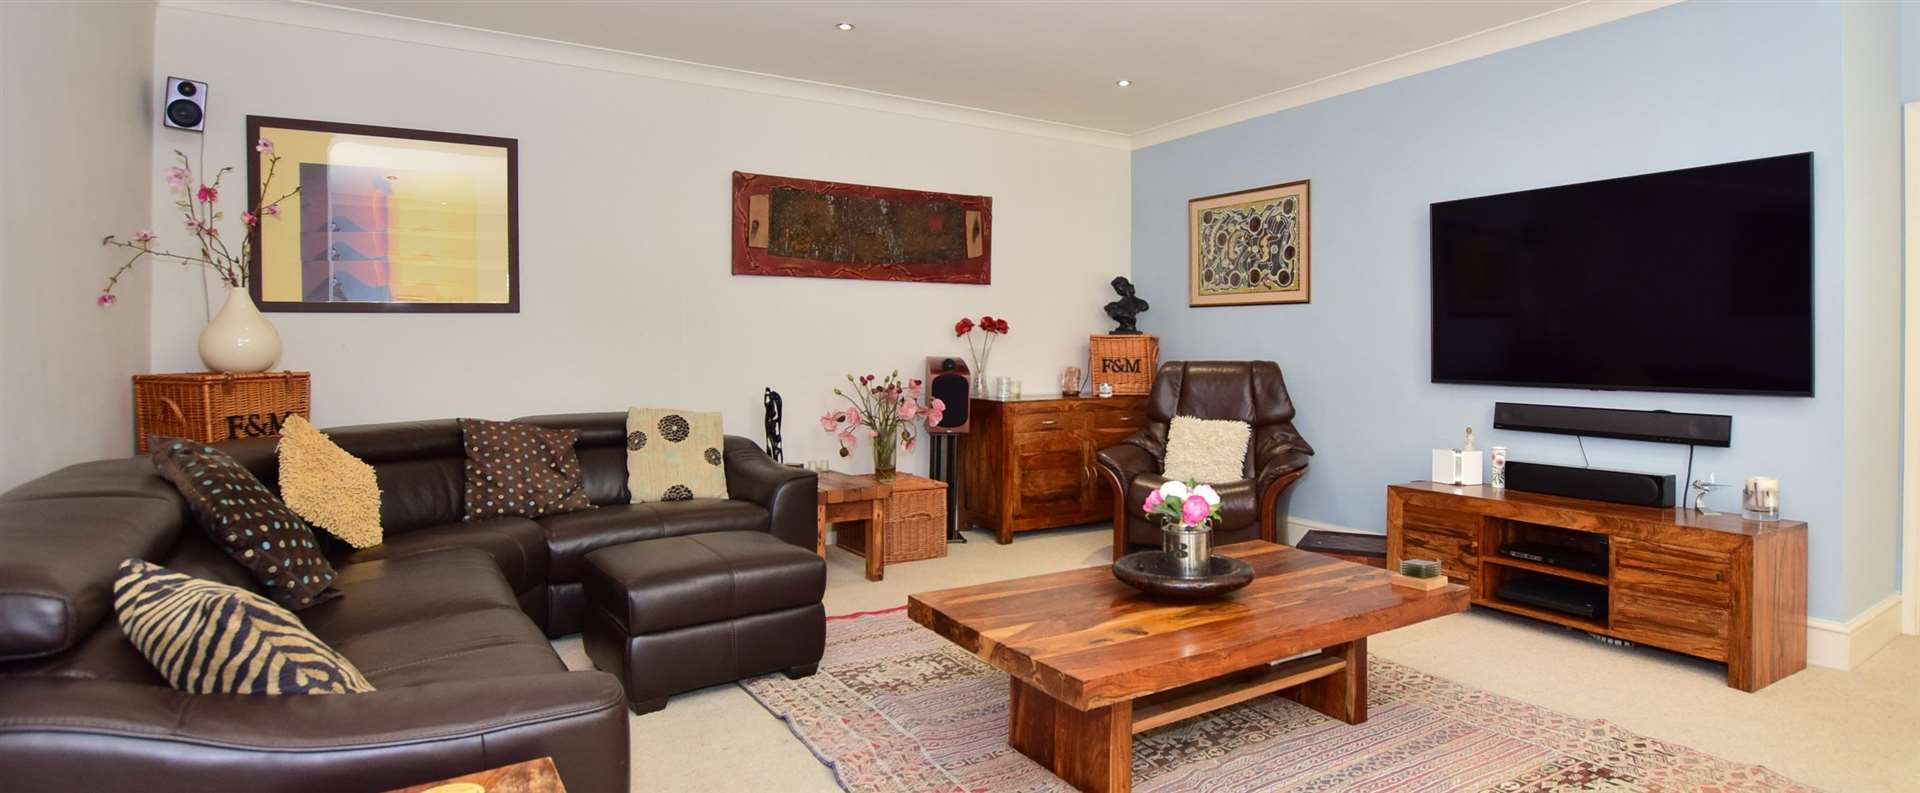 Interior of house for sale at Mierscourt Road